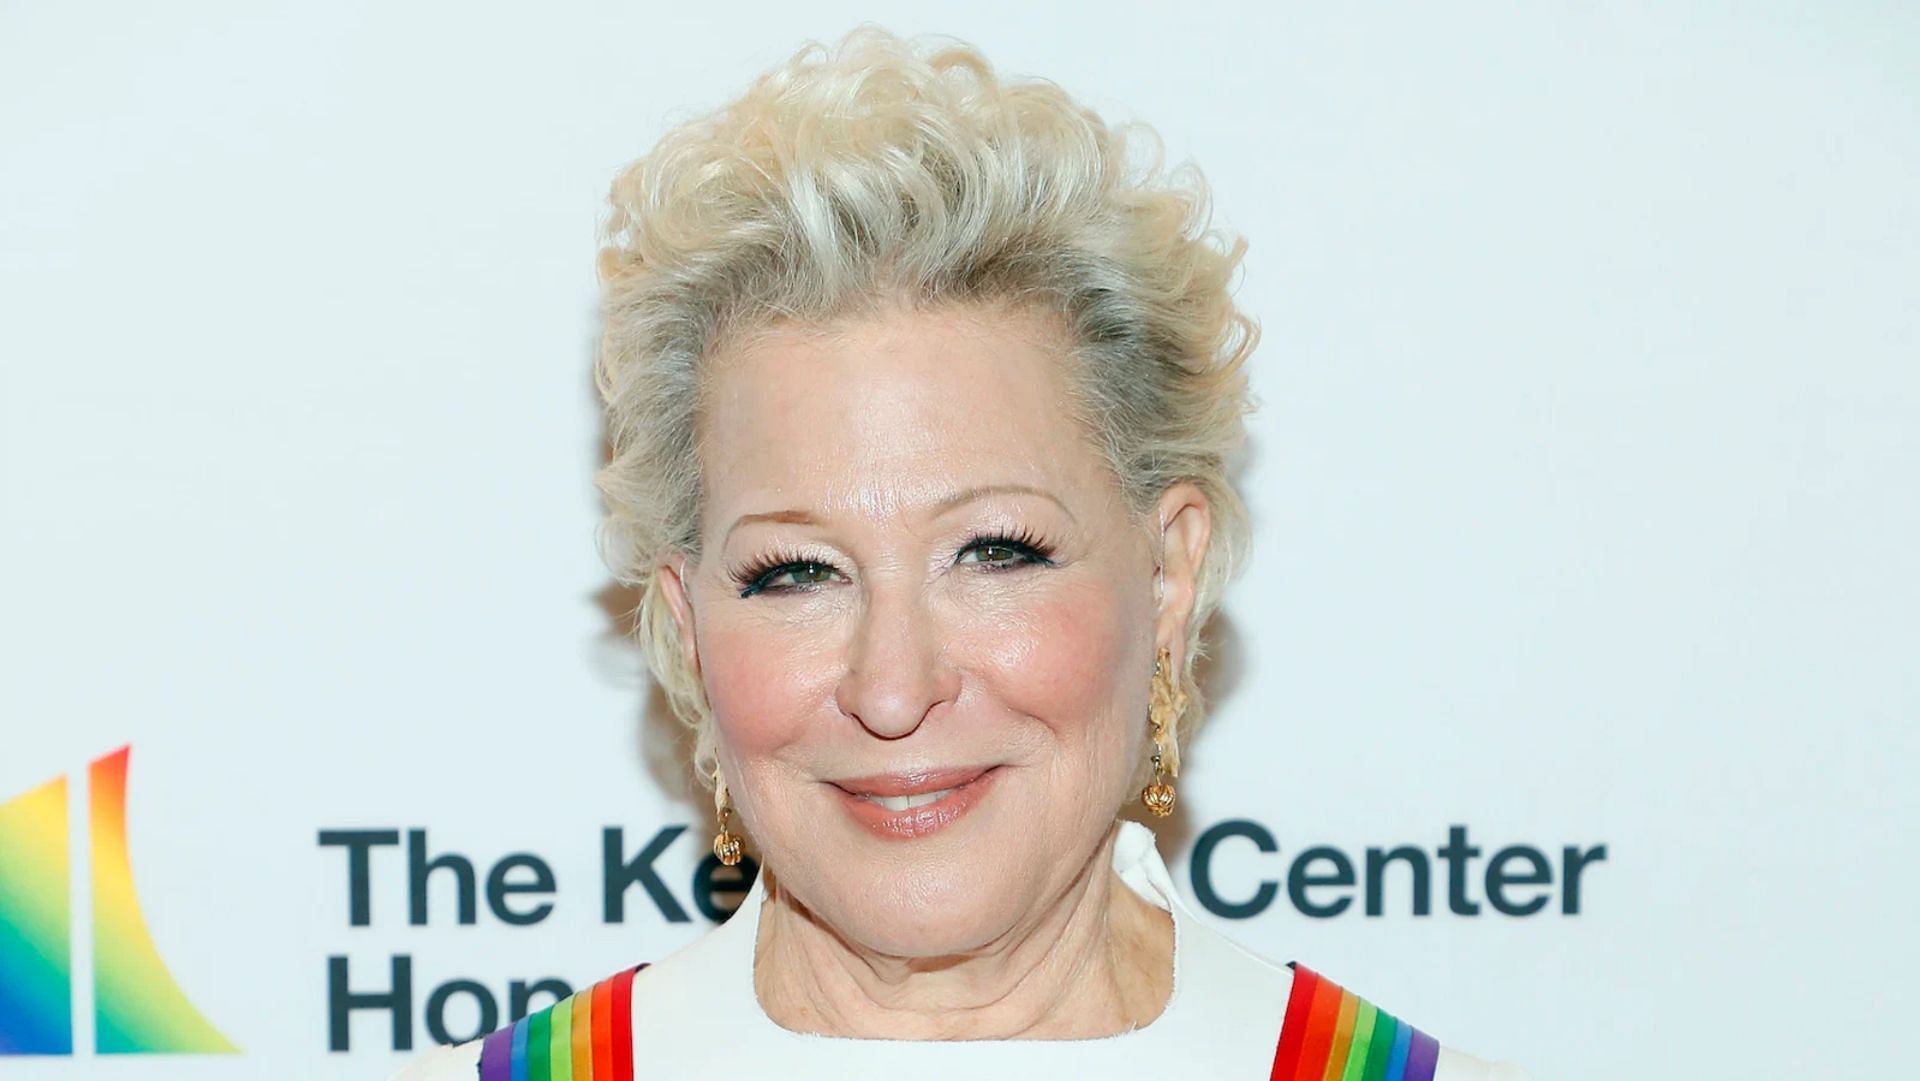 Bette Midler will be co-starring with her First Wives Club co-stars in another film. (Photo by Paul Morigi/Getty Images)